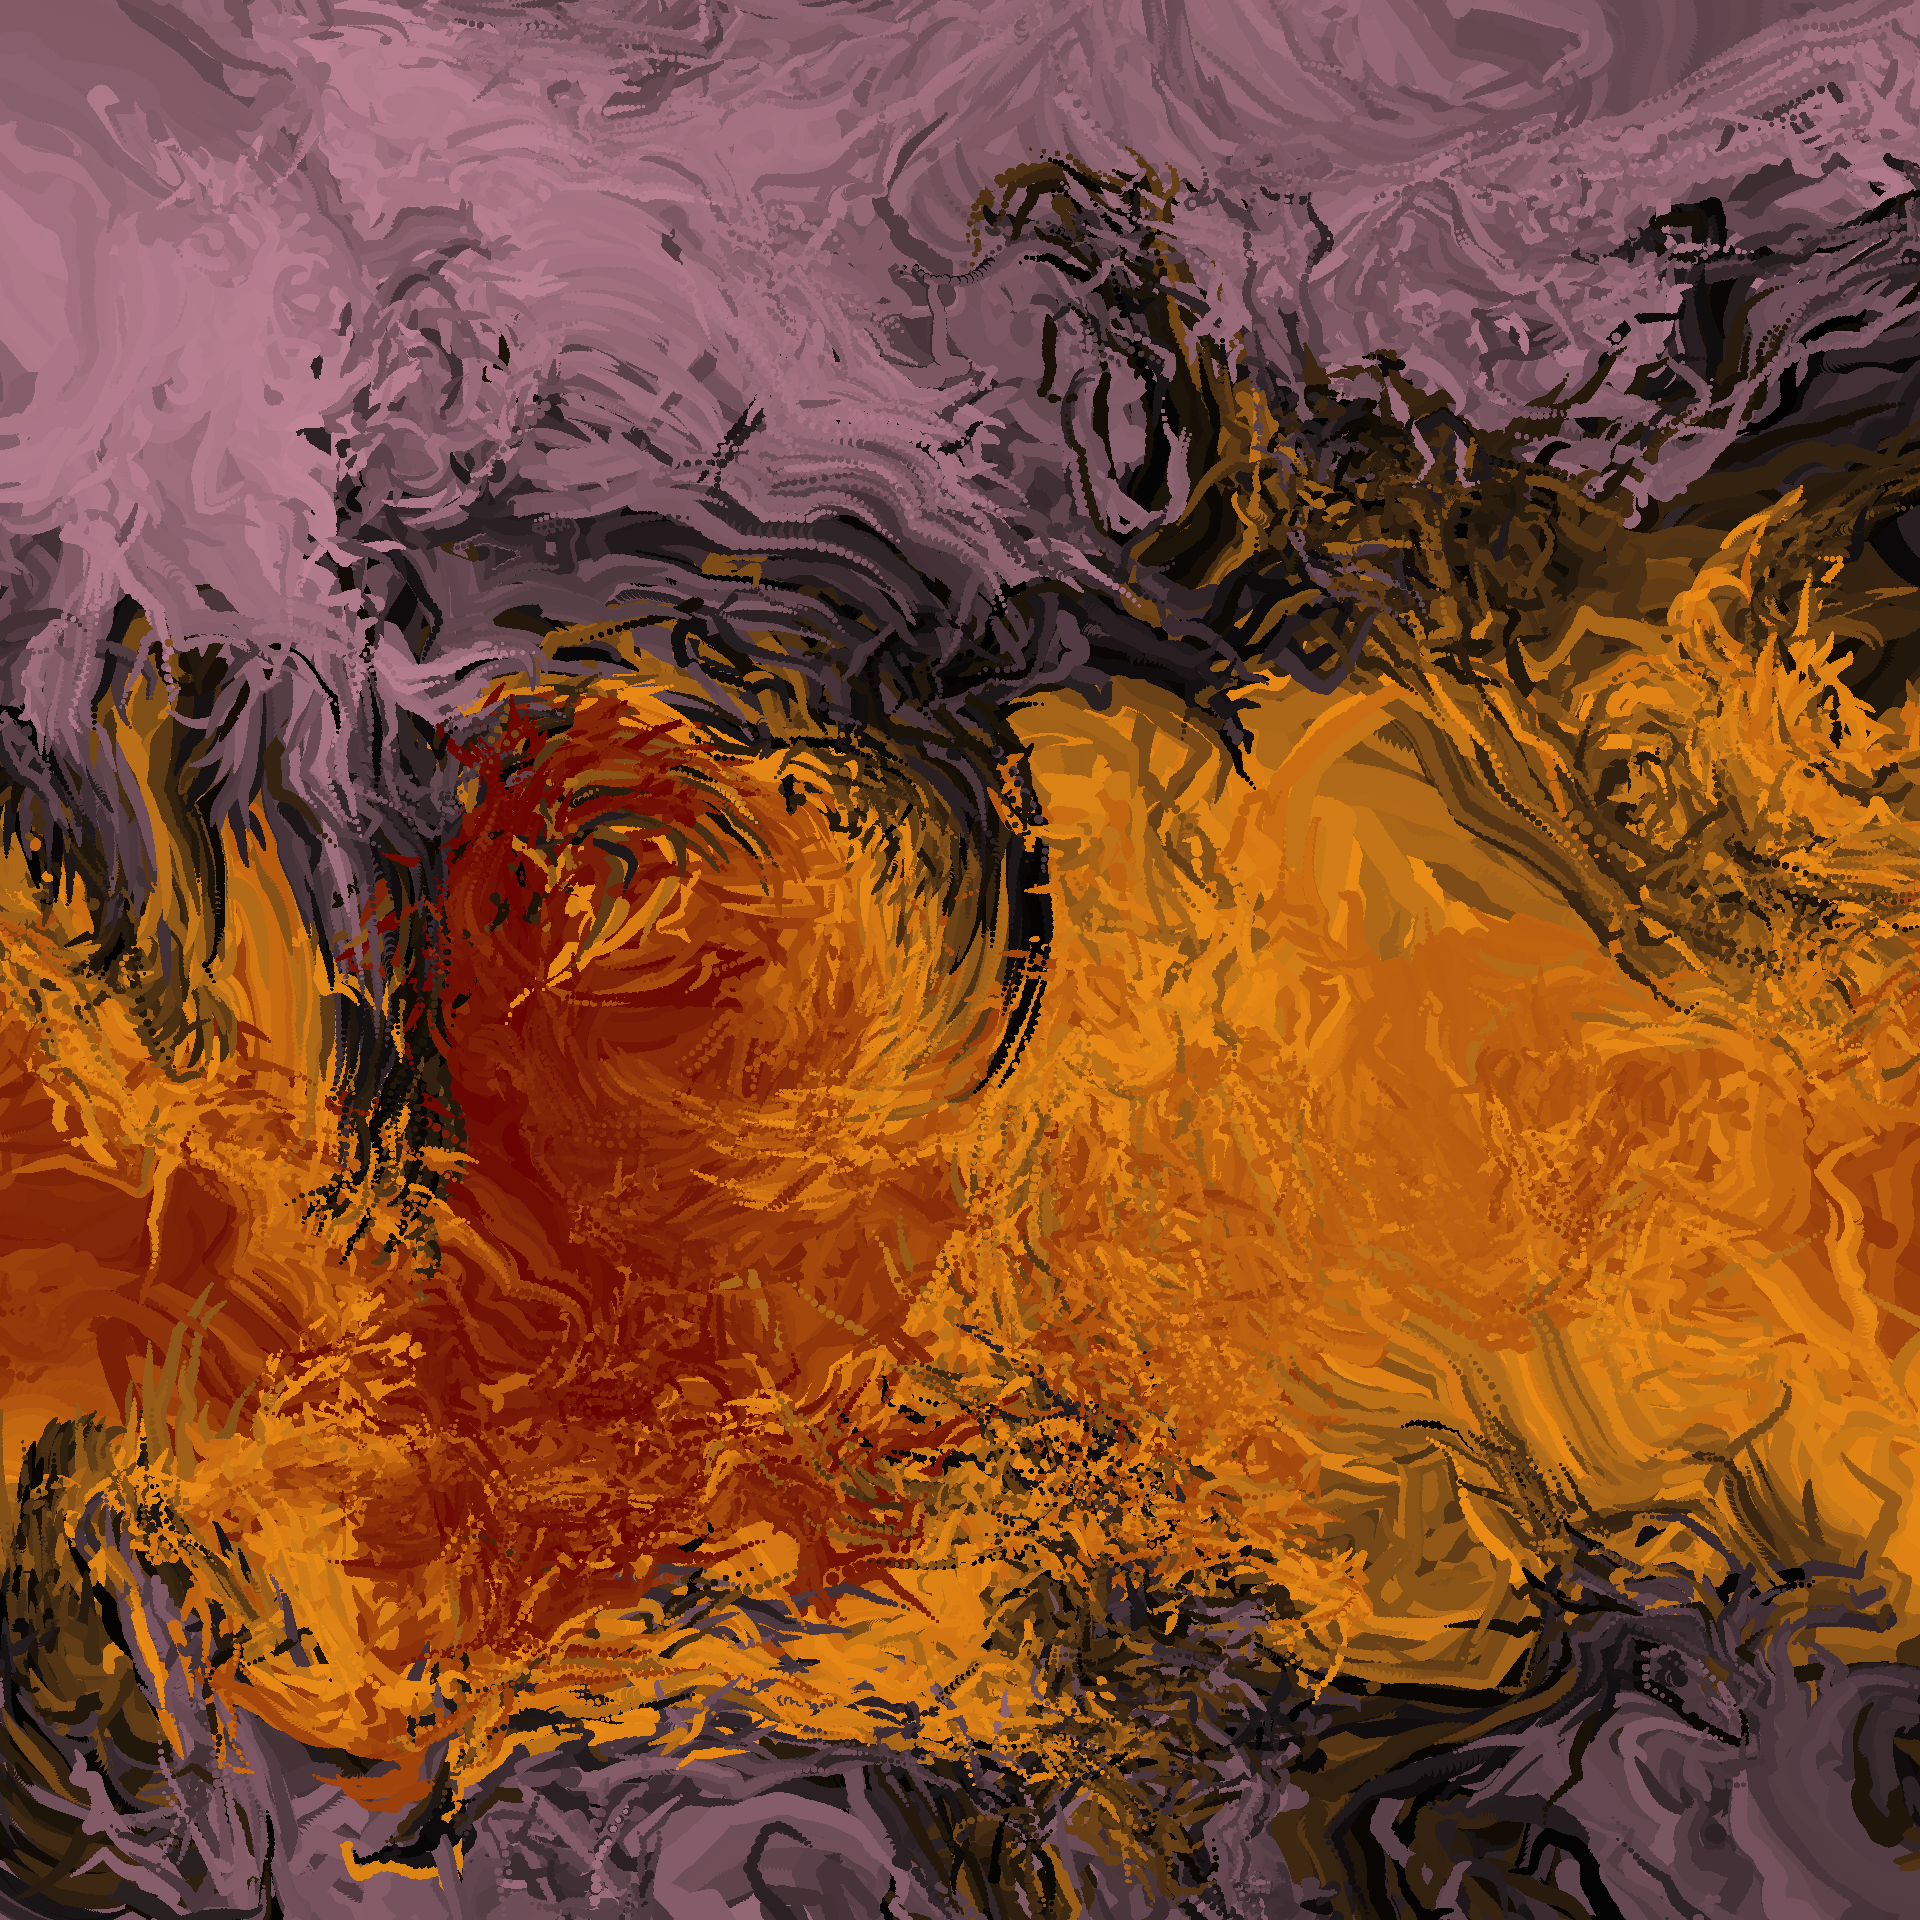 Swirling generative art in orange, red, black and pink